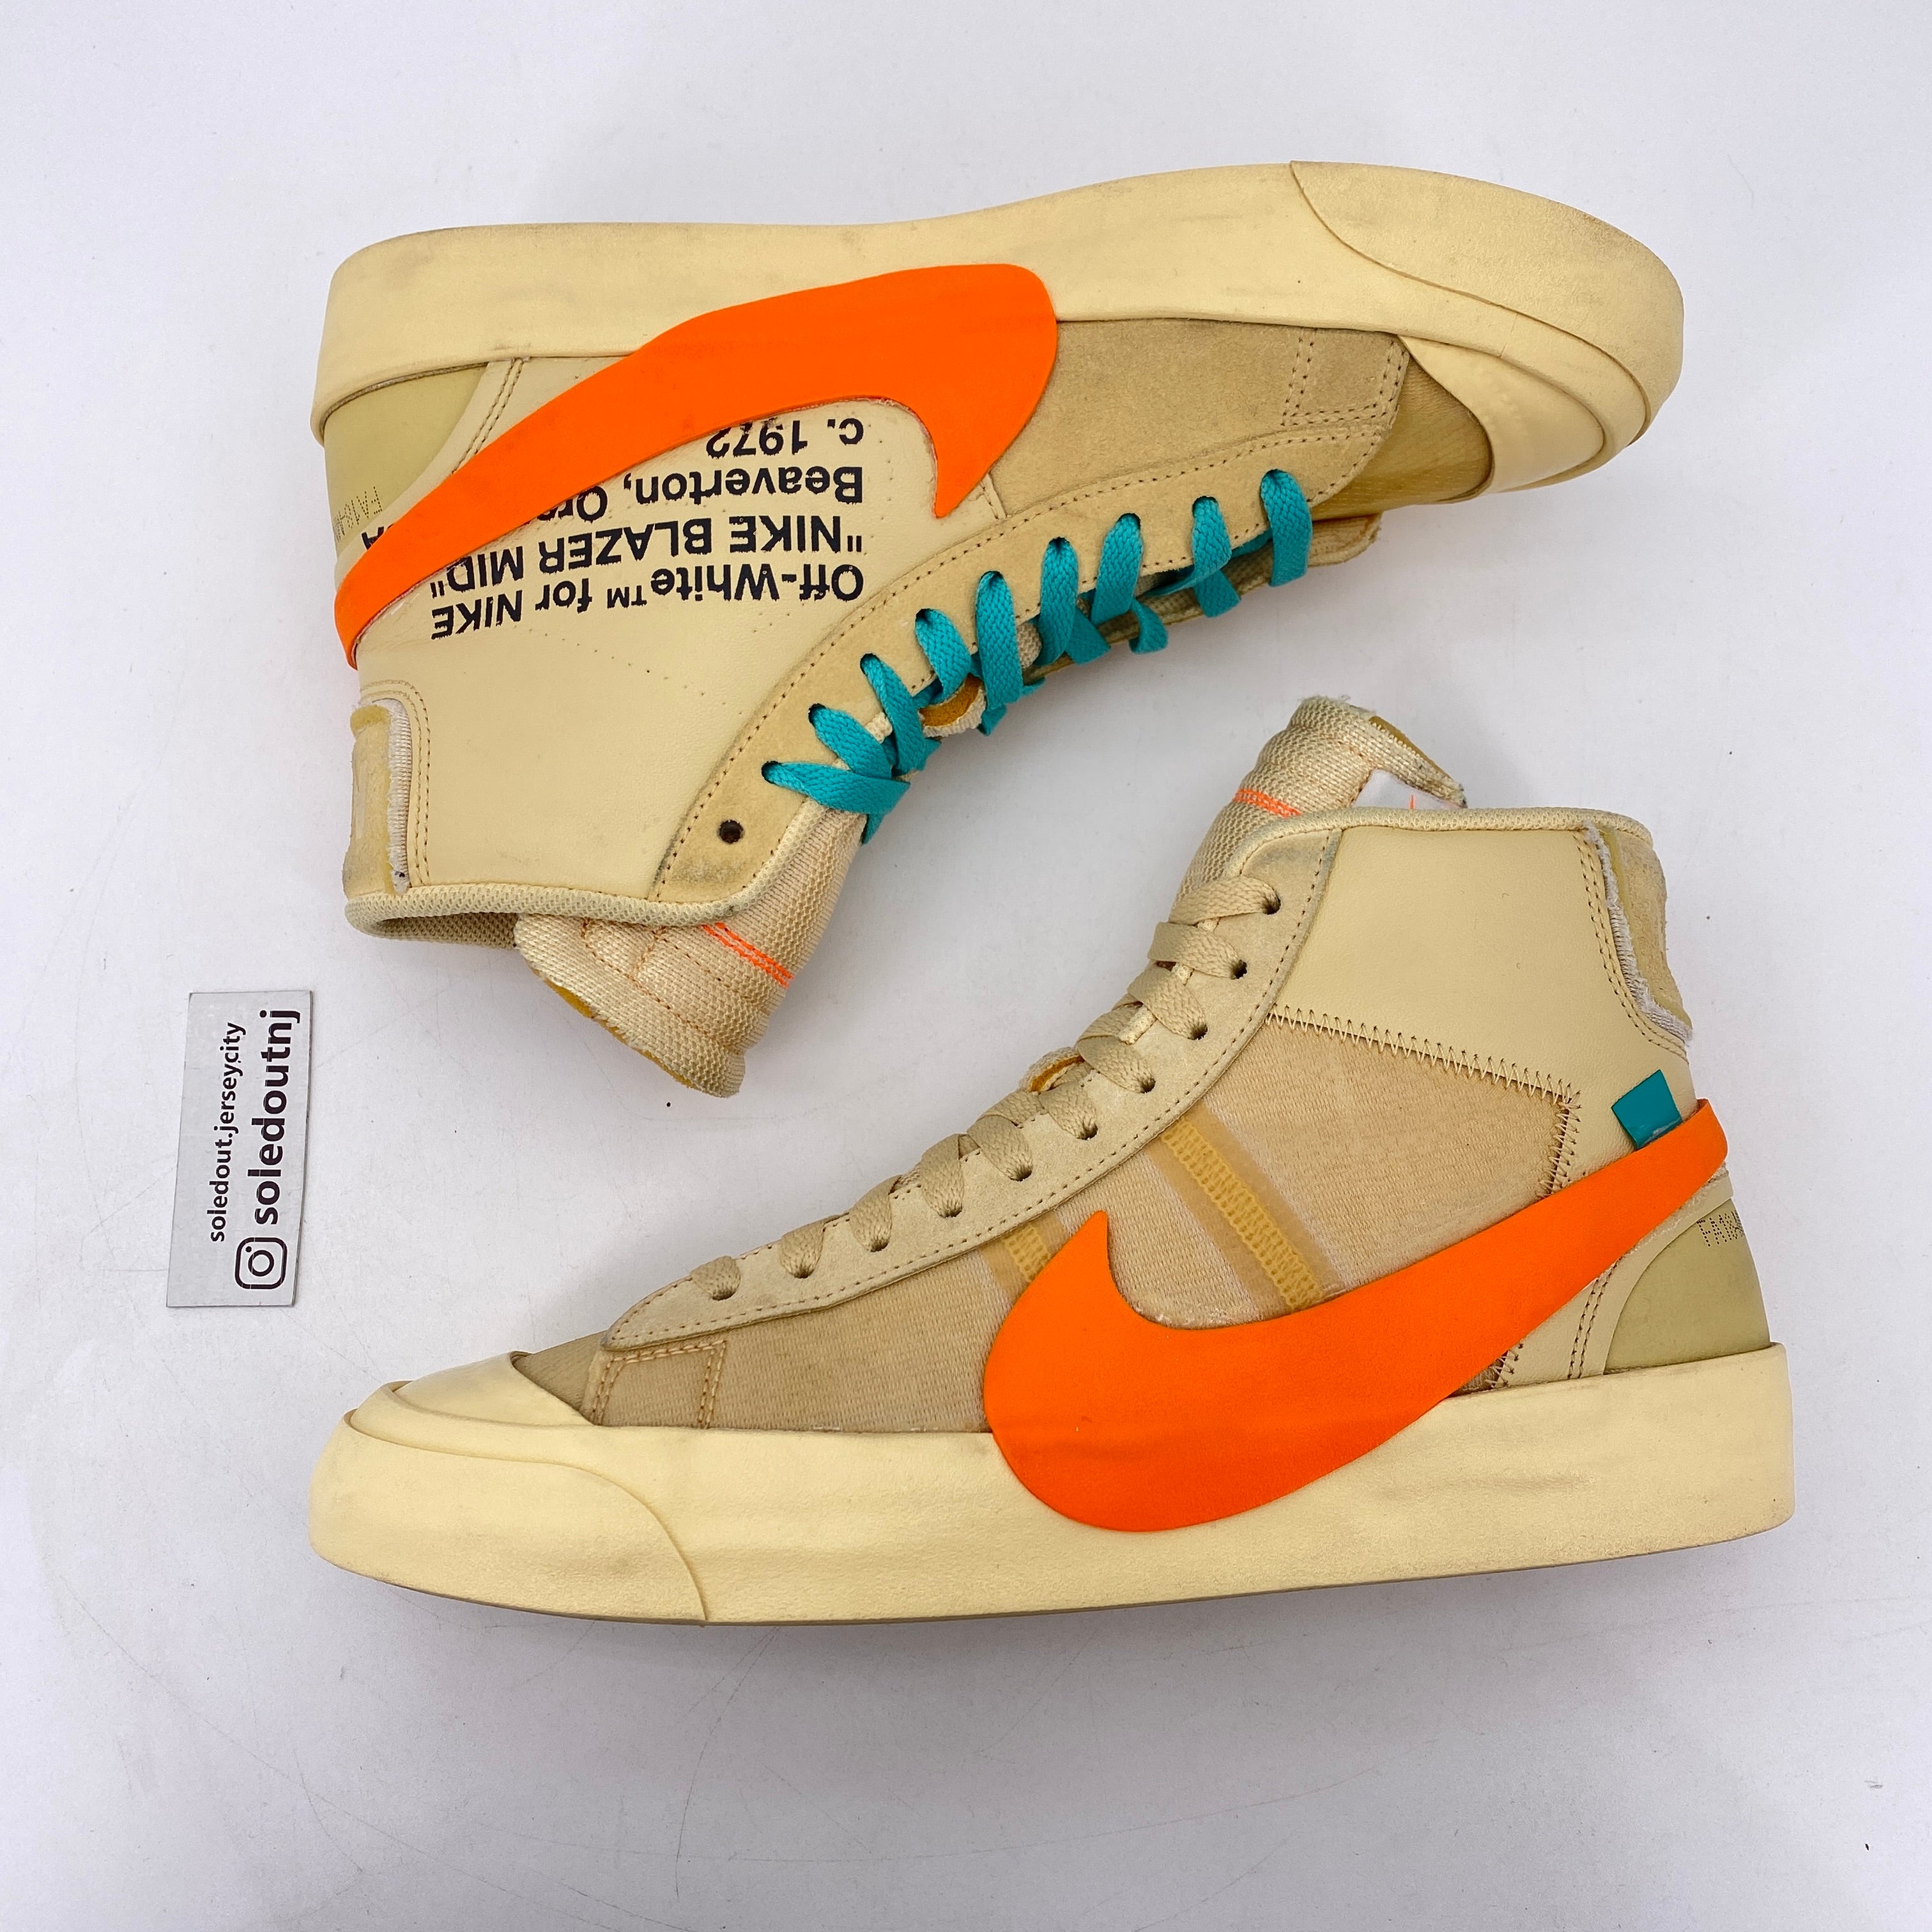 Nike Blazer Mid &quot;All Hallows Eve&quot; 2019 Used Size 9